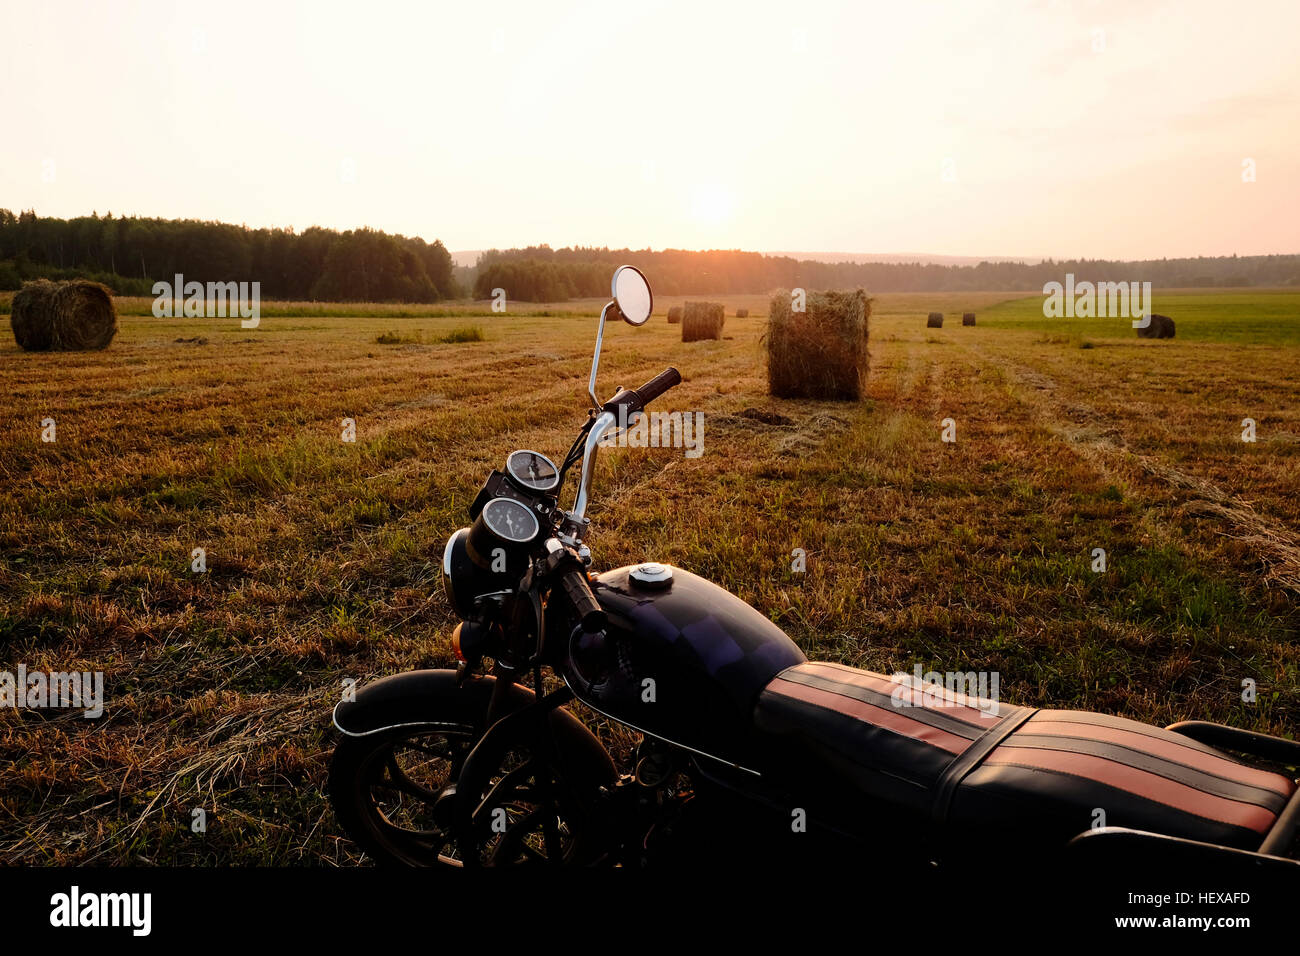 Motorbike parked in field at sunset, Ural, Russia Stock Photo